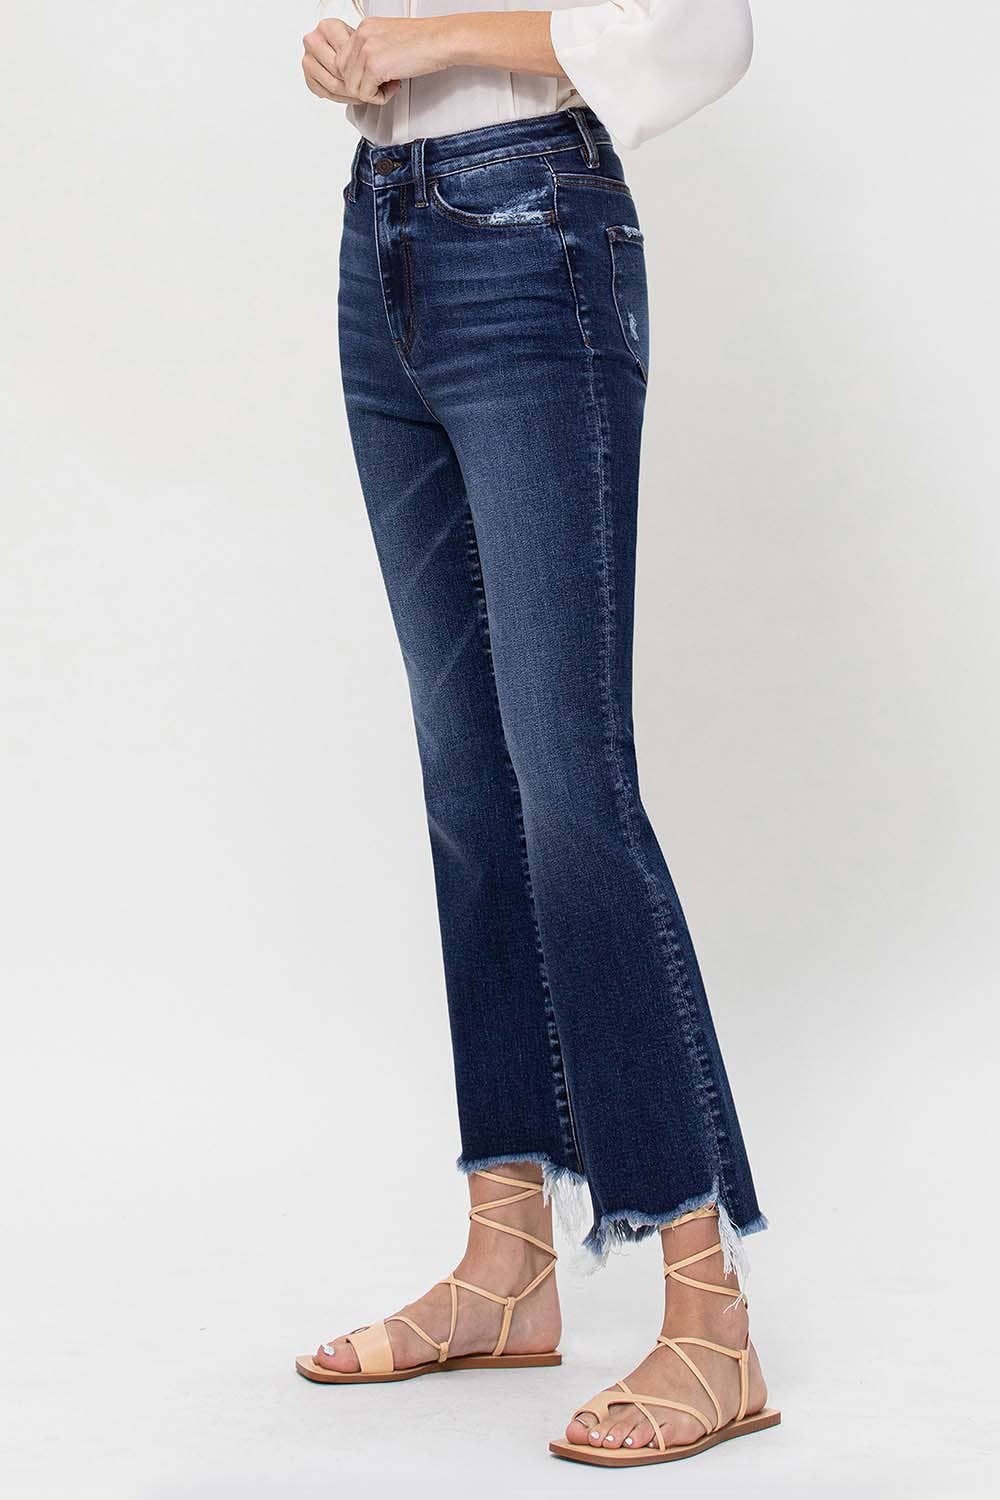 CLEARANCE FINAL SALE Willa High Rise Ankle Flare Denim Jeans